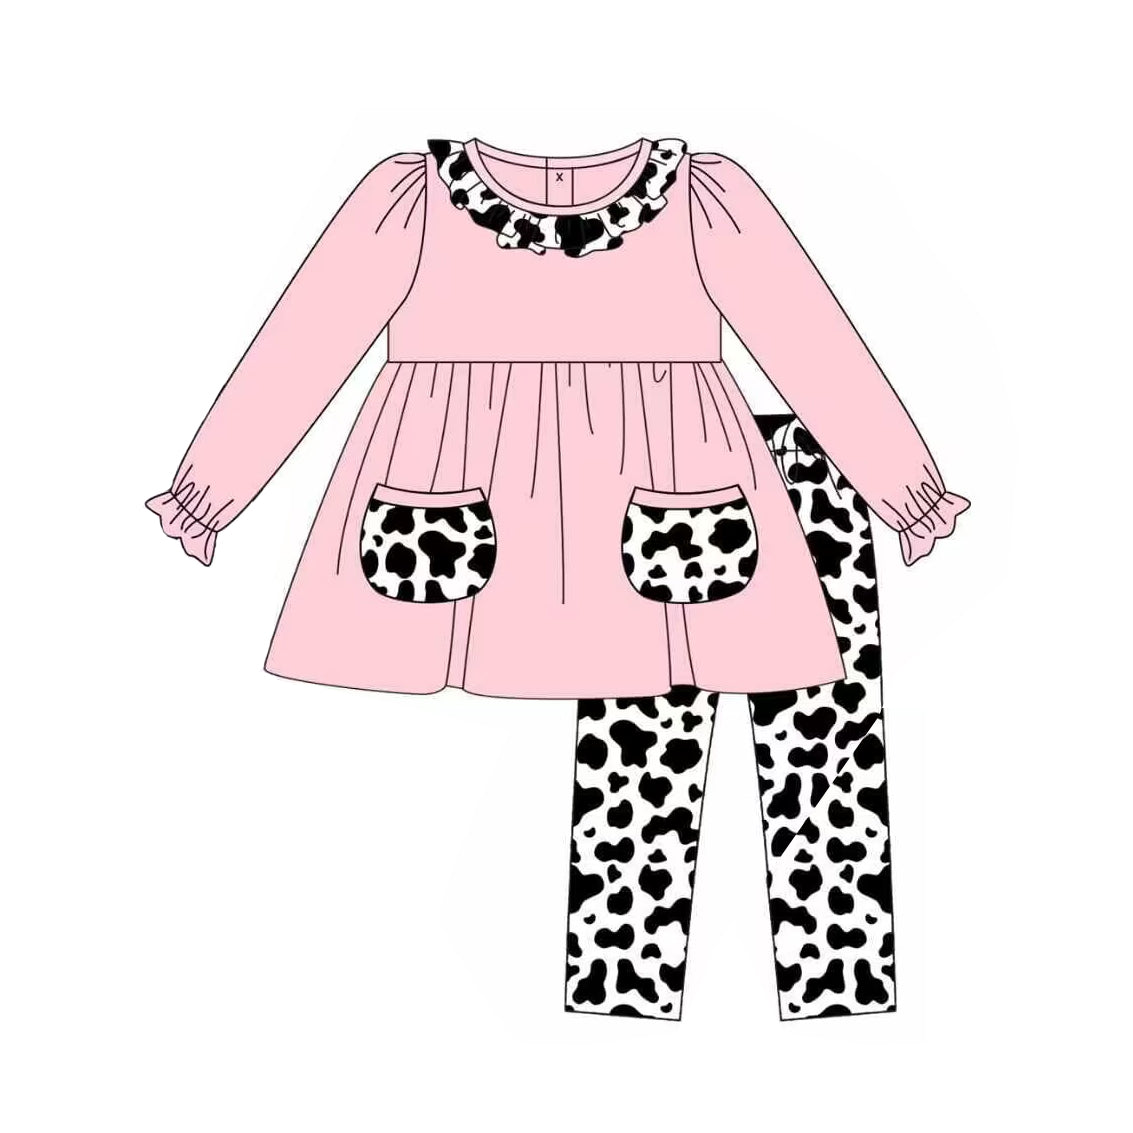 No moq GLP1463 Pre-order Size 3-6m to 14-16t baby girl clothes long sleeve top with trousers kids autumn set